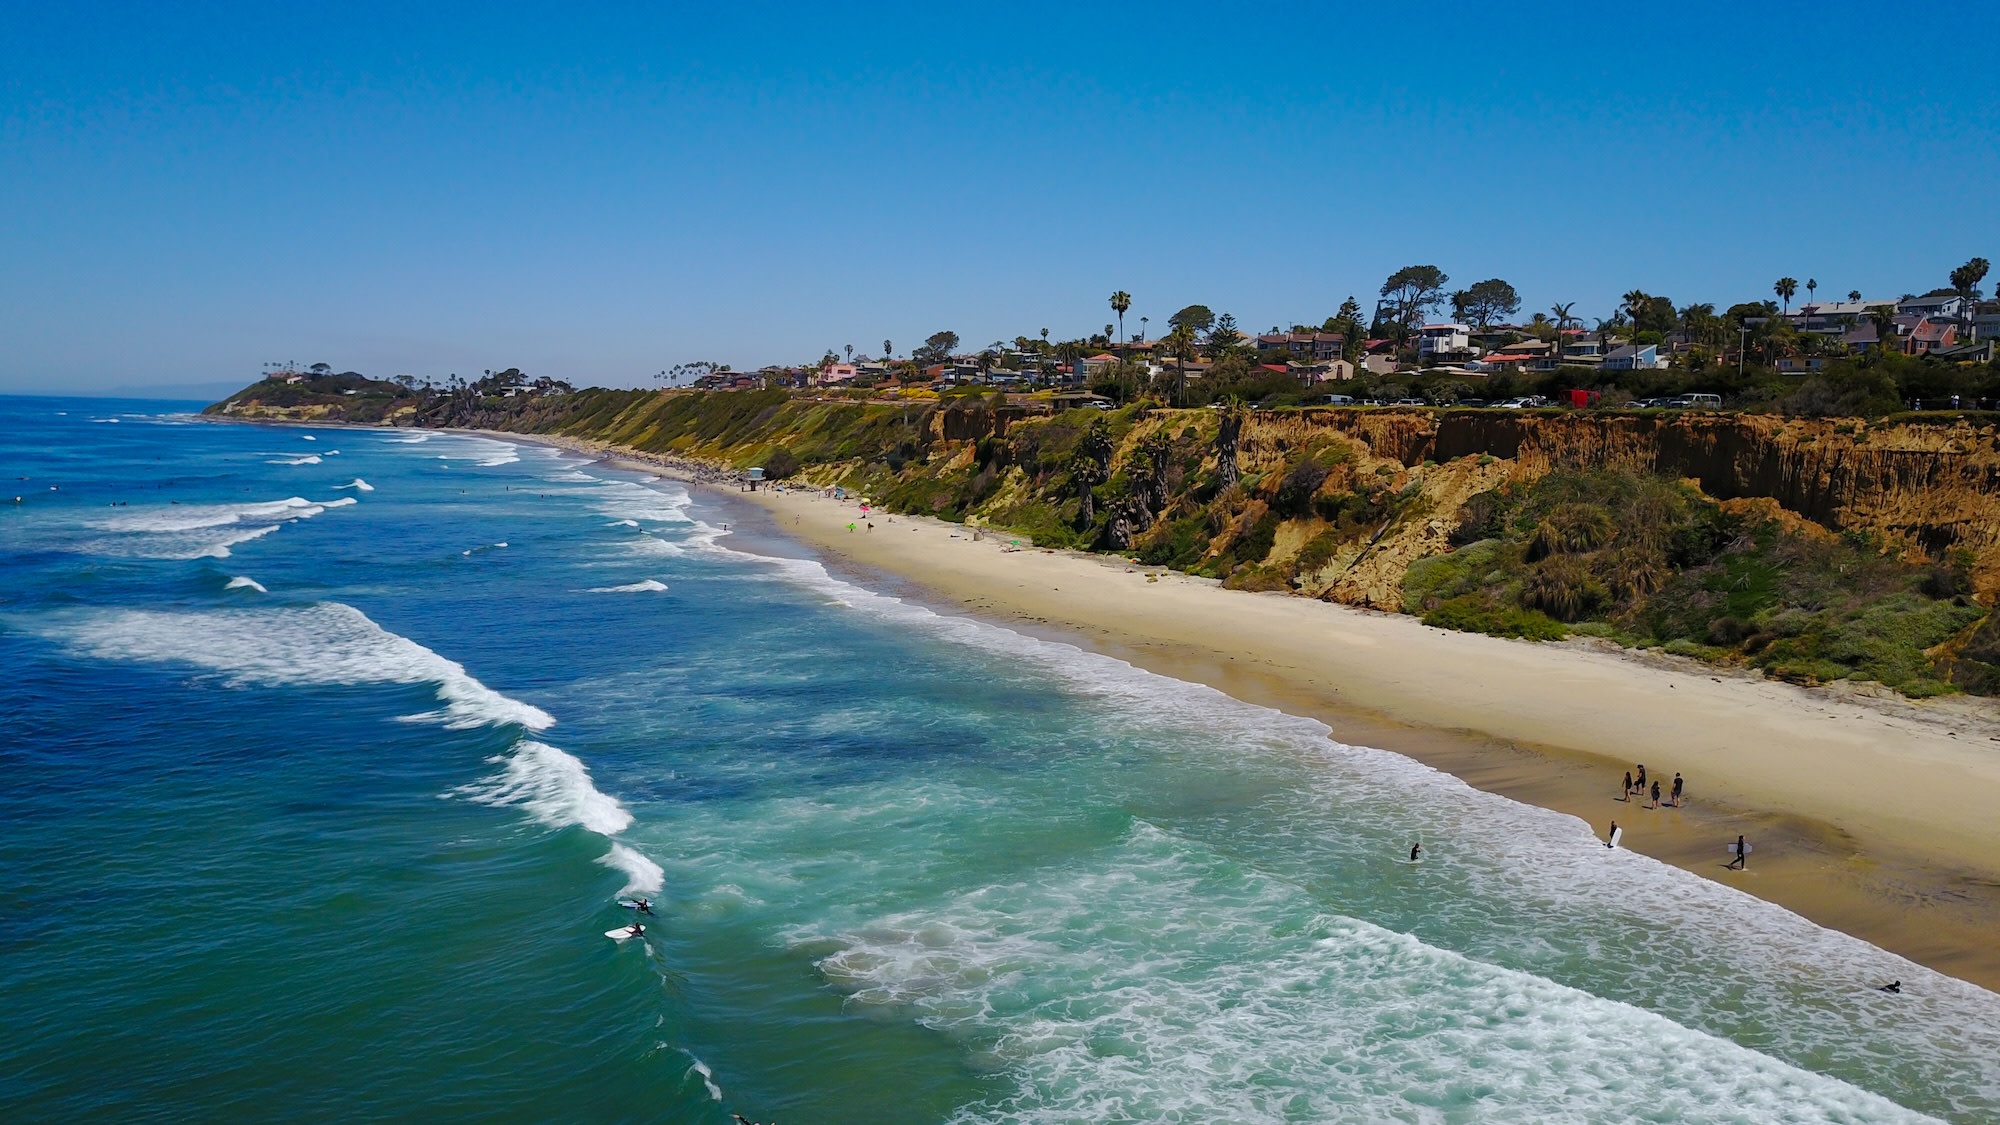 Photo of the expansive beach and ocean in Encinitas with cliffs topped by houses in the background